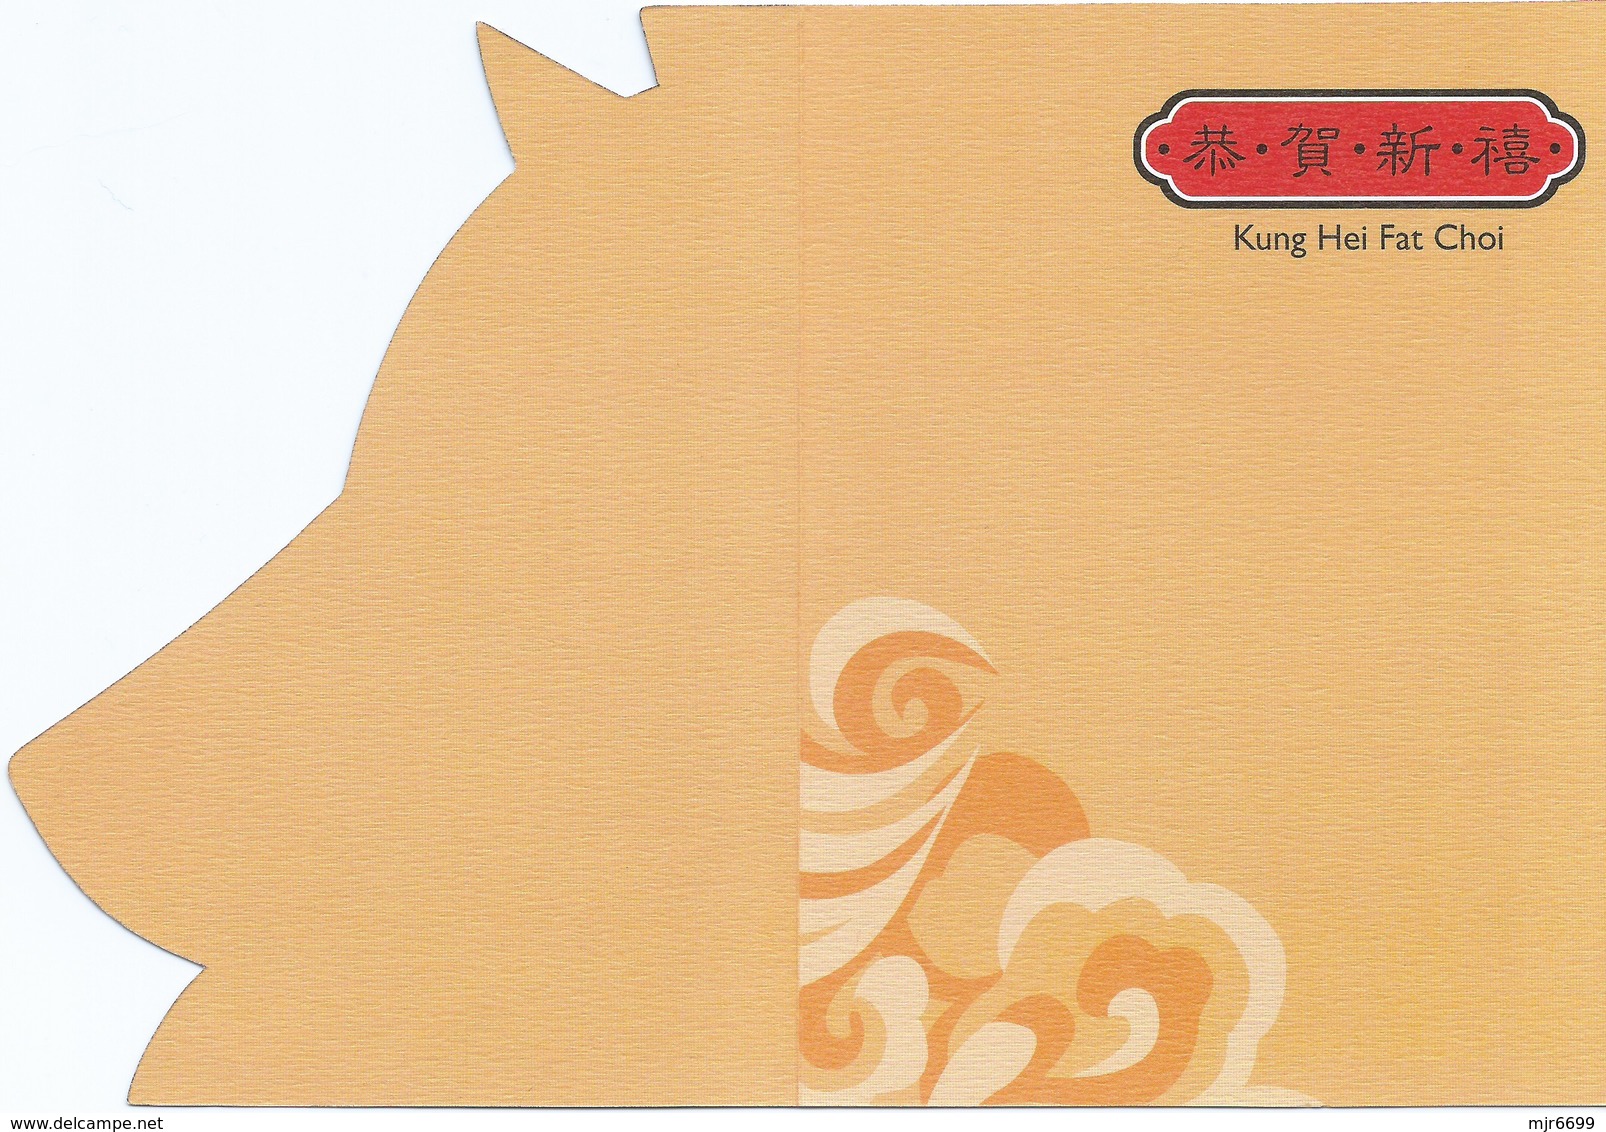 MACAU 2005 LUNAR YEAR OF THE DOG GREETING CARD & POSTAGE PAID COVER FIRST DAY USAGE WITH COLOANE POST CDS - Interi Postali